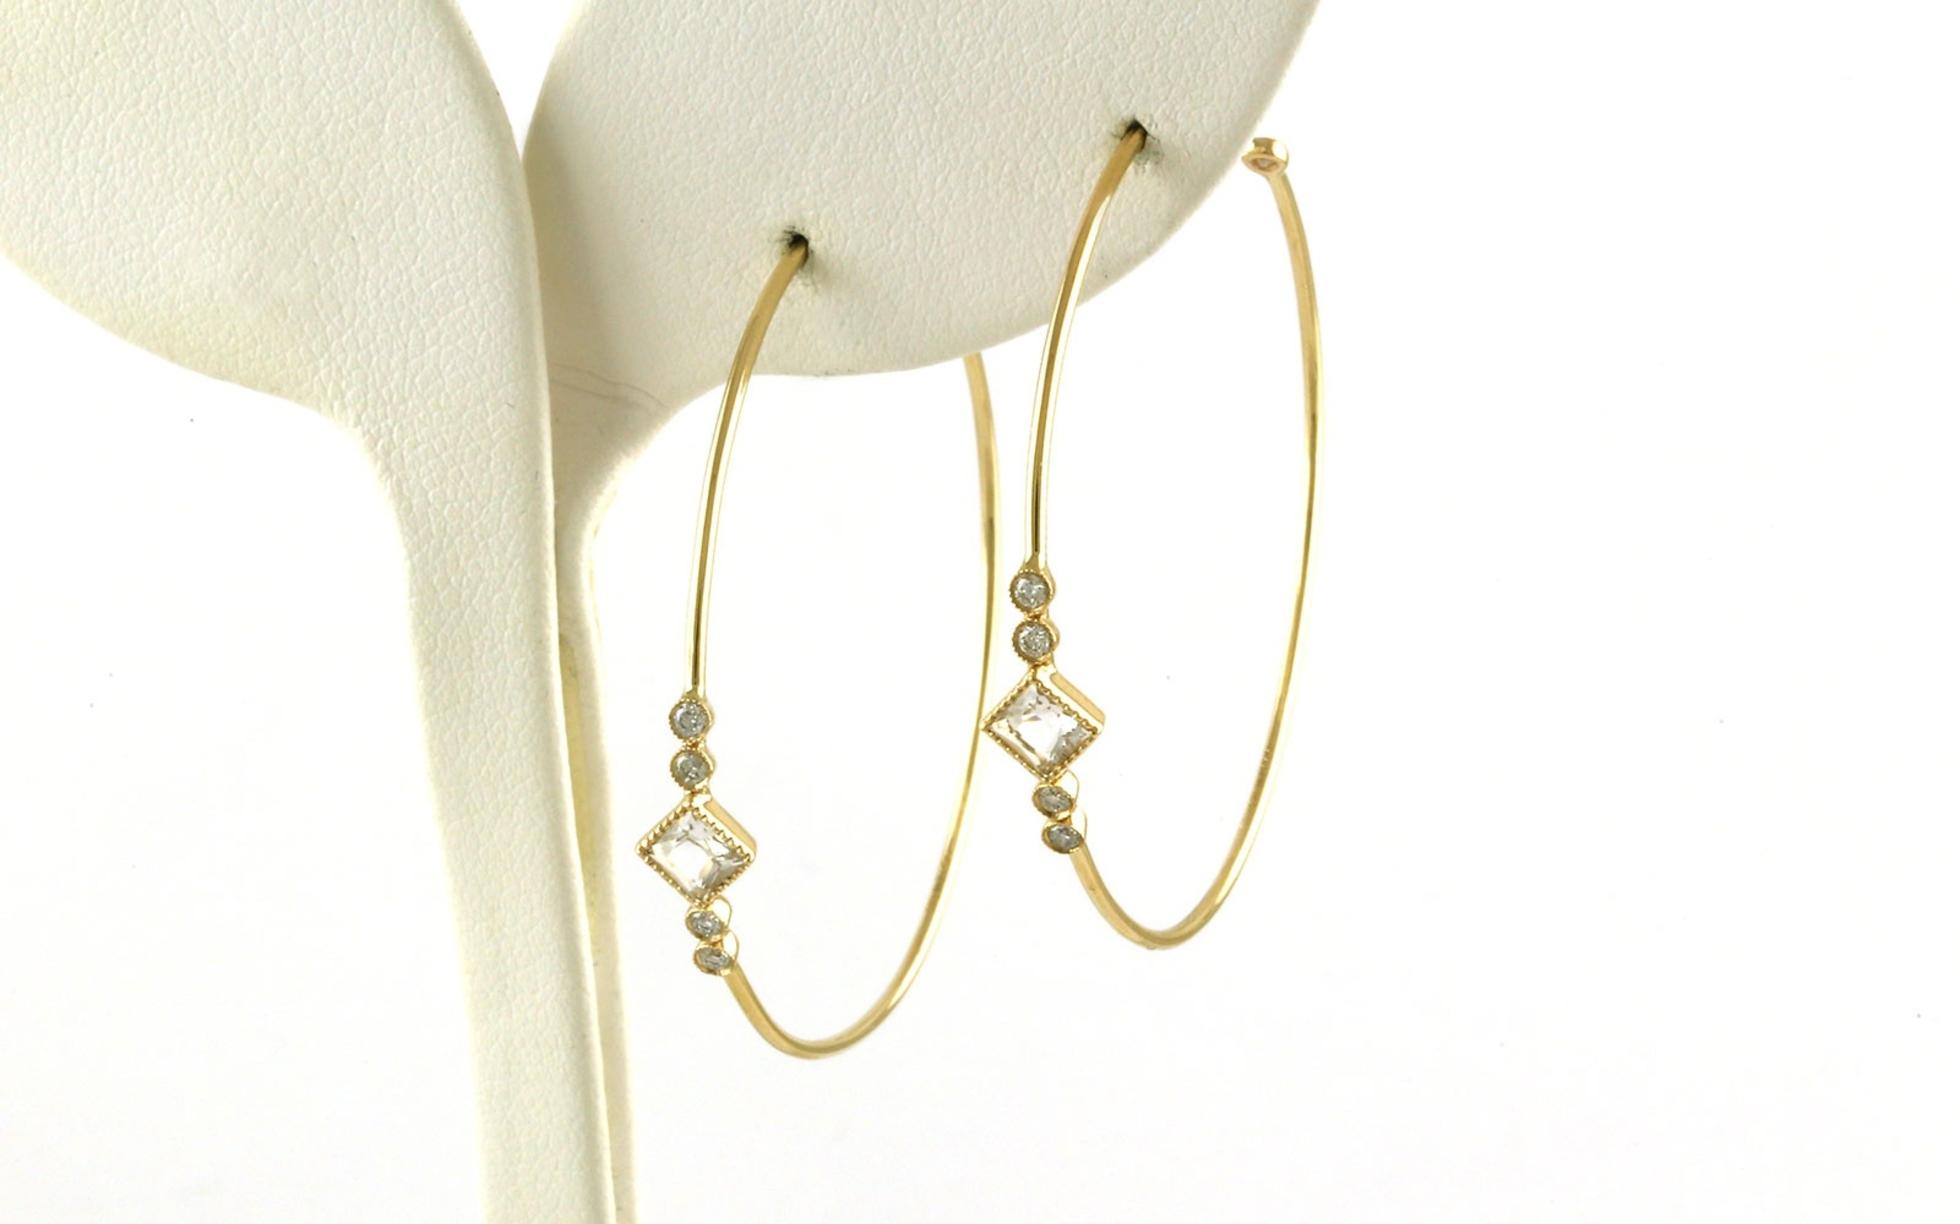 5-Stone Stud Hoop Earrings in Yellow Gold (0.85cts TWT)